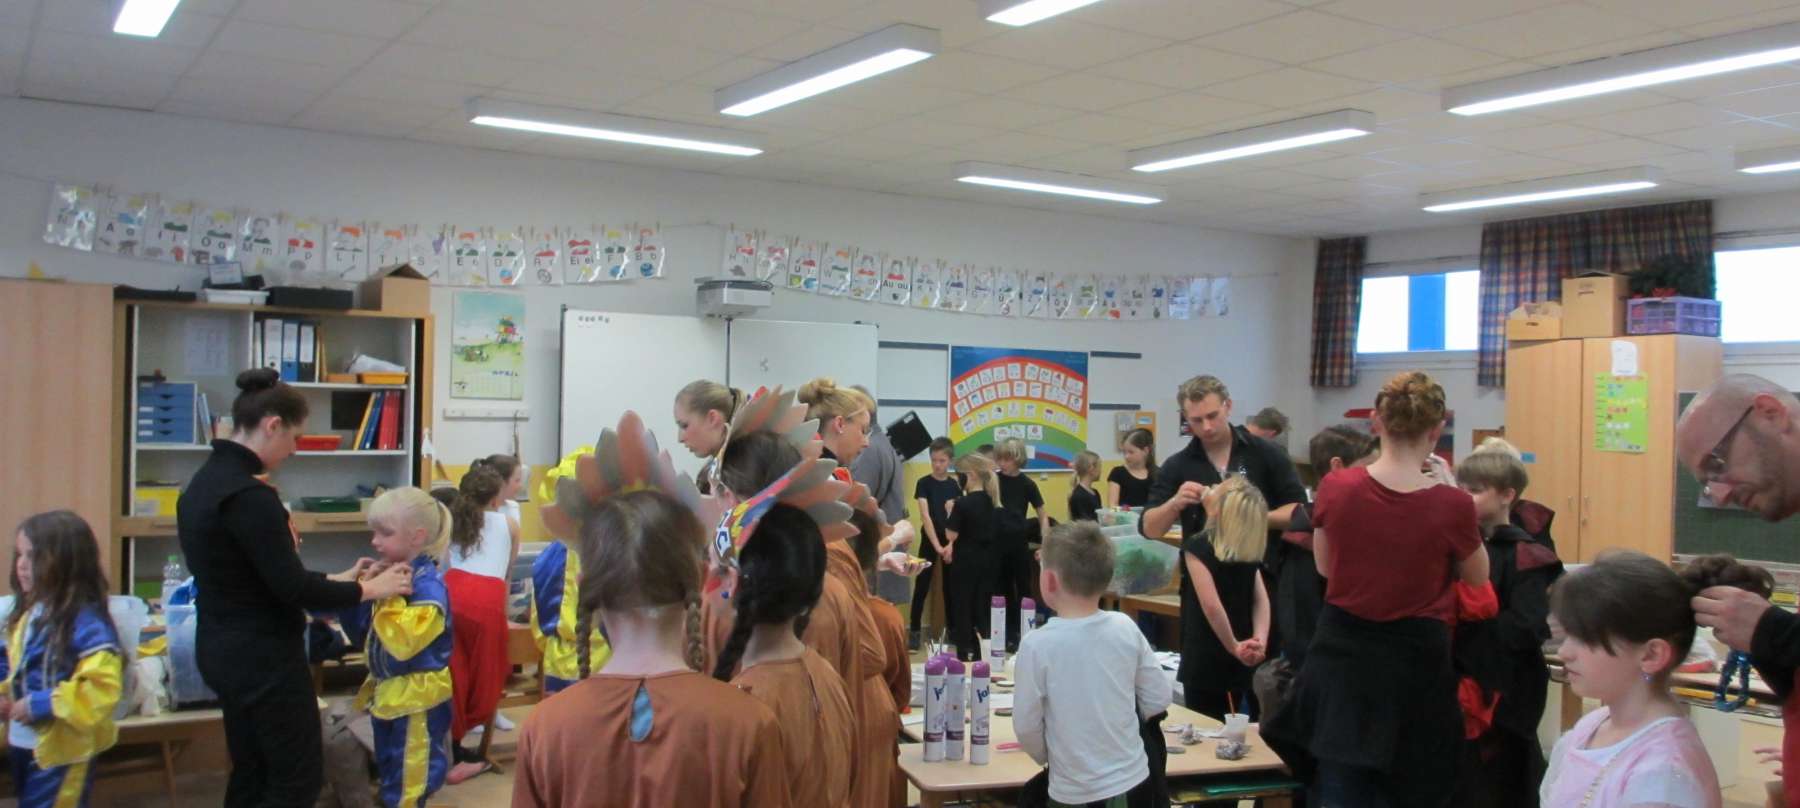 A circus project at the St. Nikolaus catholic elementary school